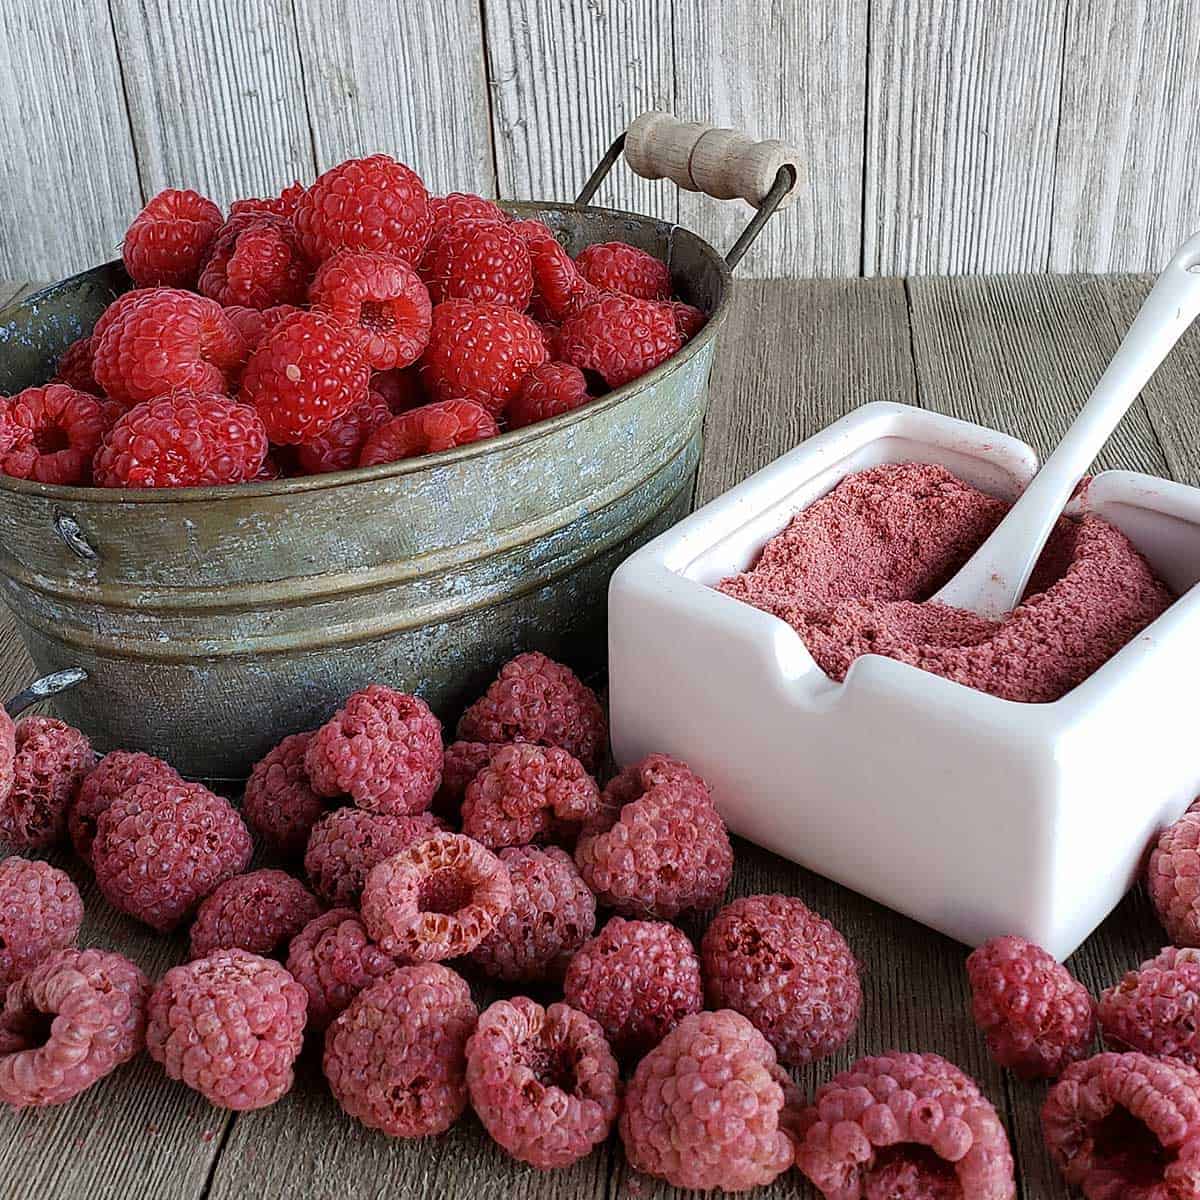 A diplay of fresh raspberries, dried raspberries and raspberry powder on a wooden surface in various serving dishes